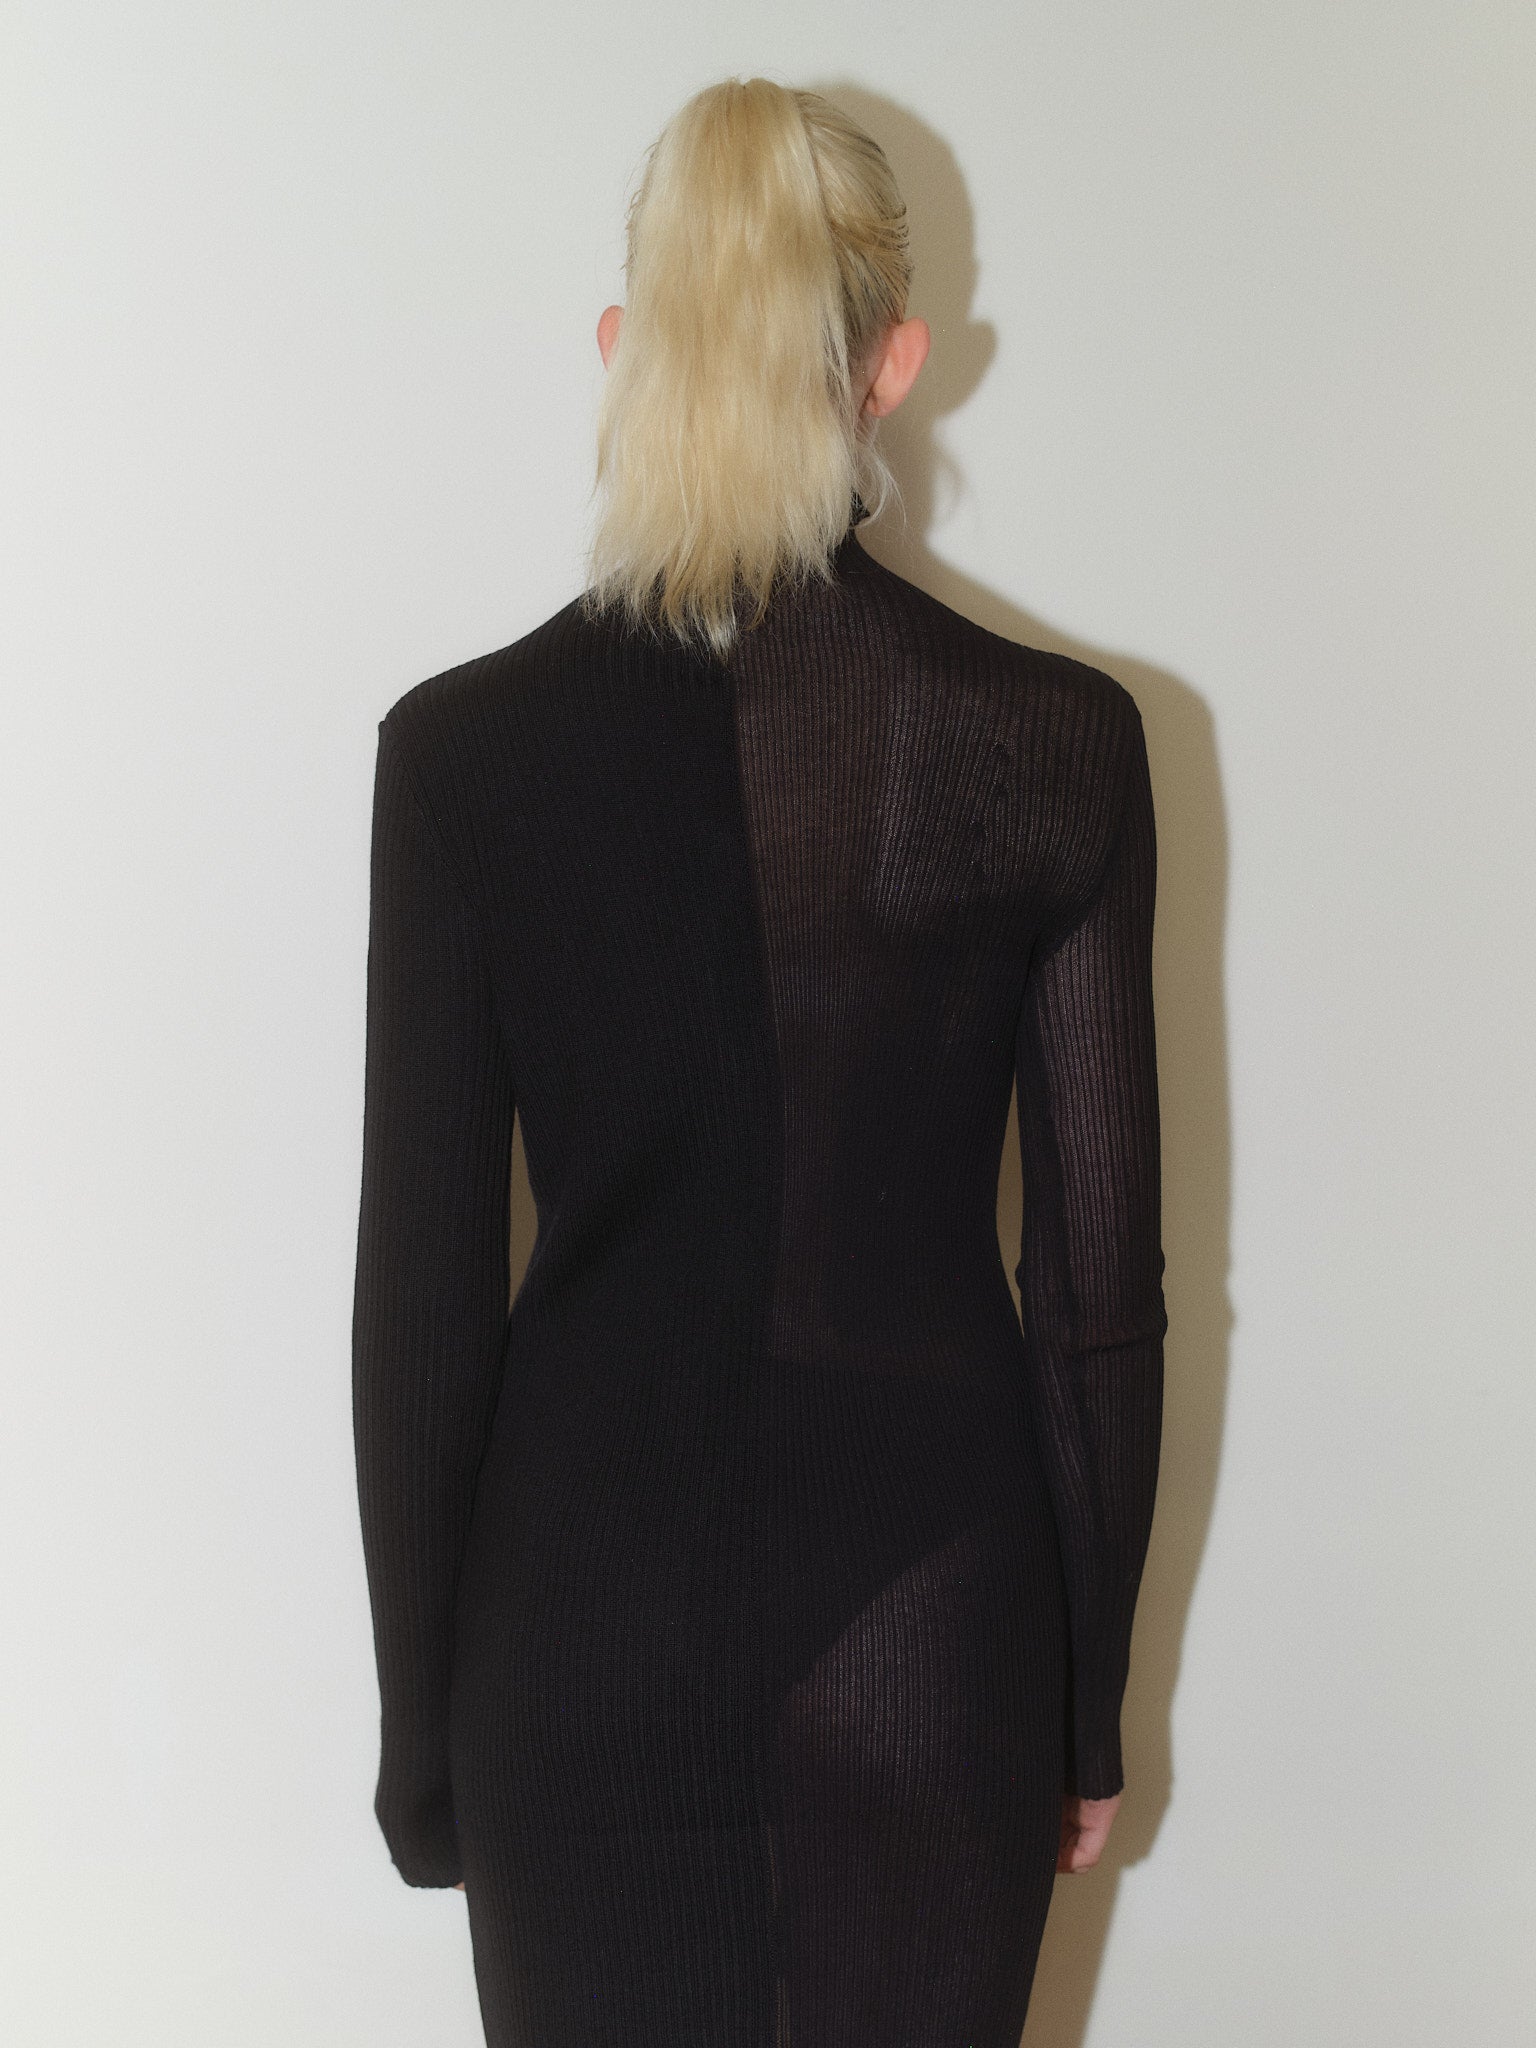 Knitted Dress designed by Christina Seewald. Sustainable, designed and made in Europe. Best Quality Yarns from Italy.